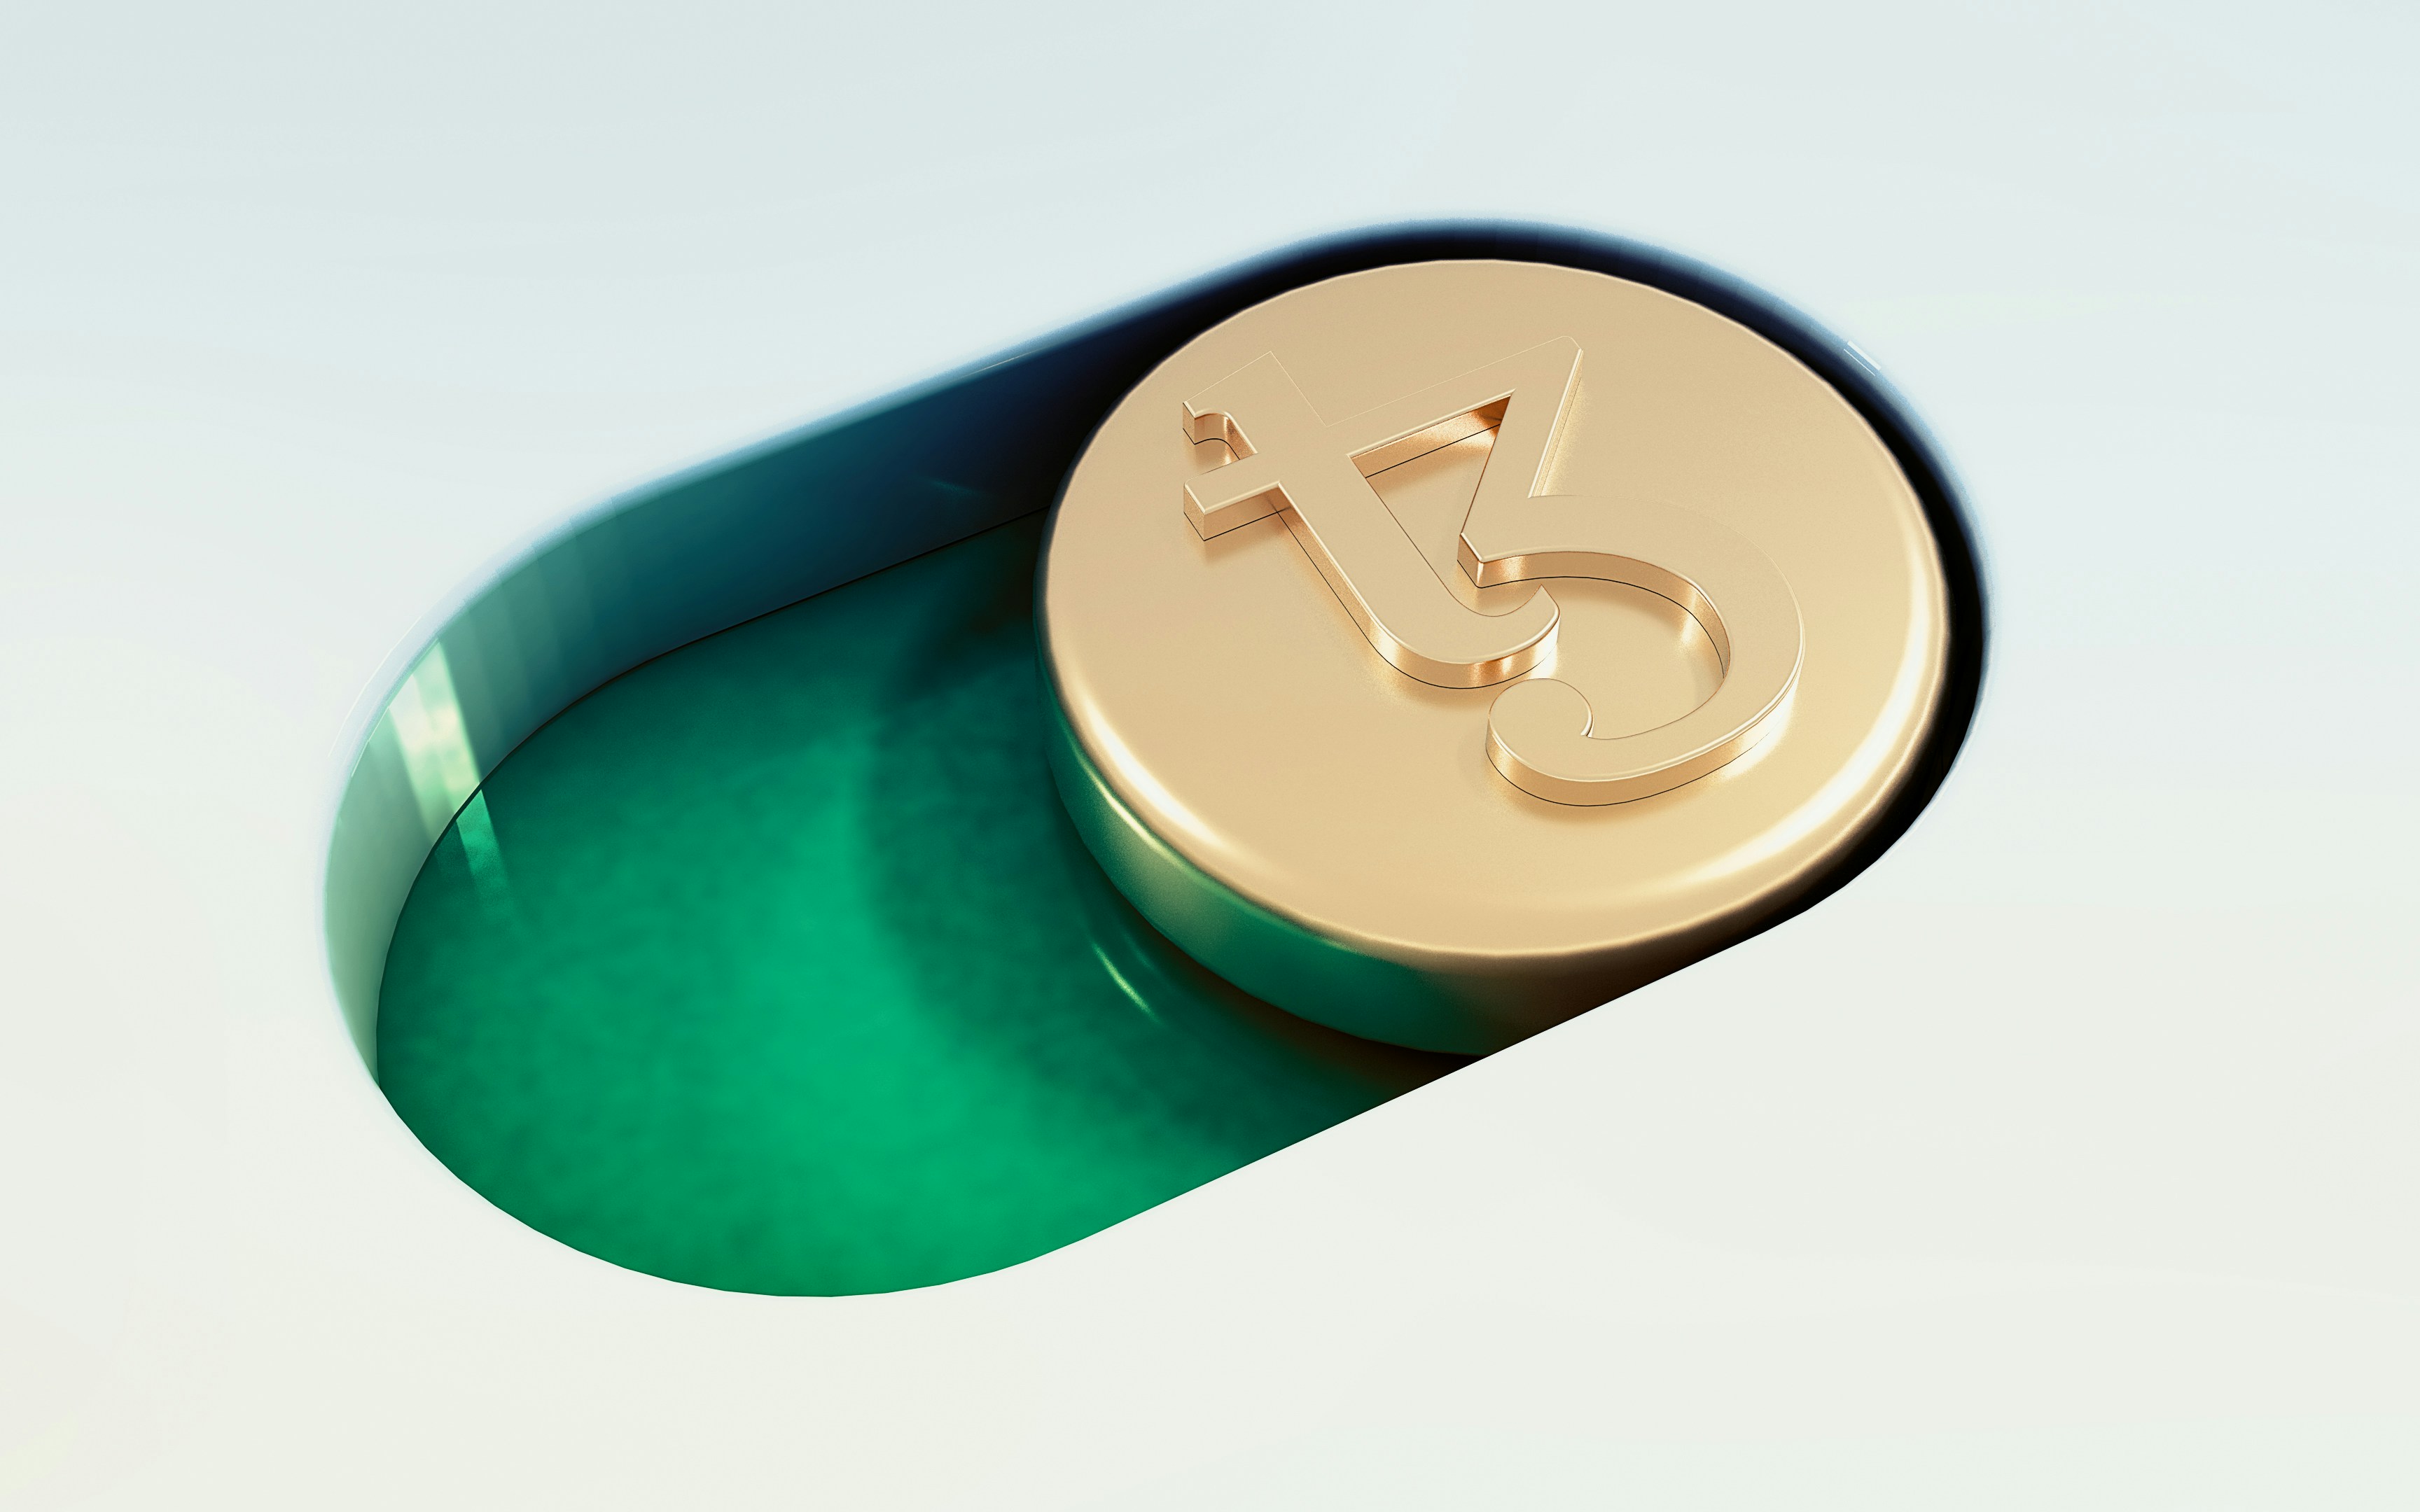 Close-up shot of a Tezos Cryptocurrency coin, stylized as a toggle notification button.